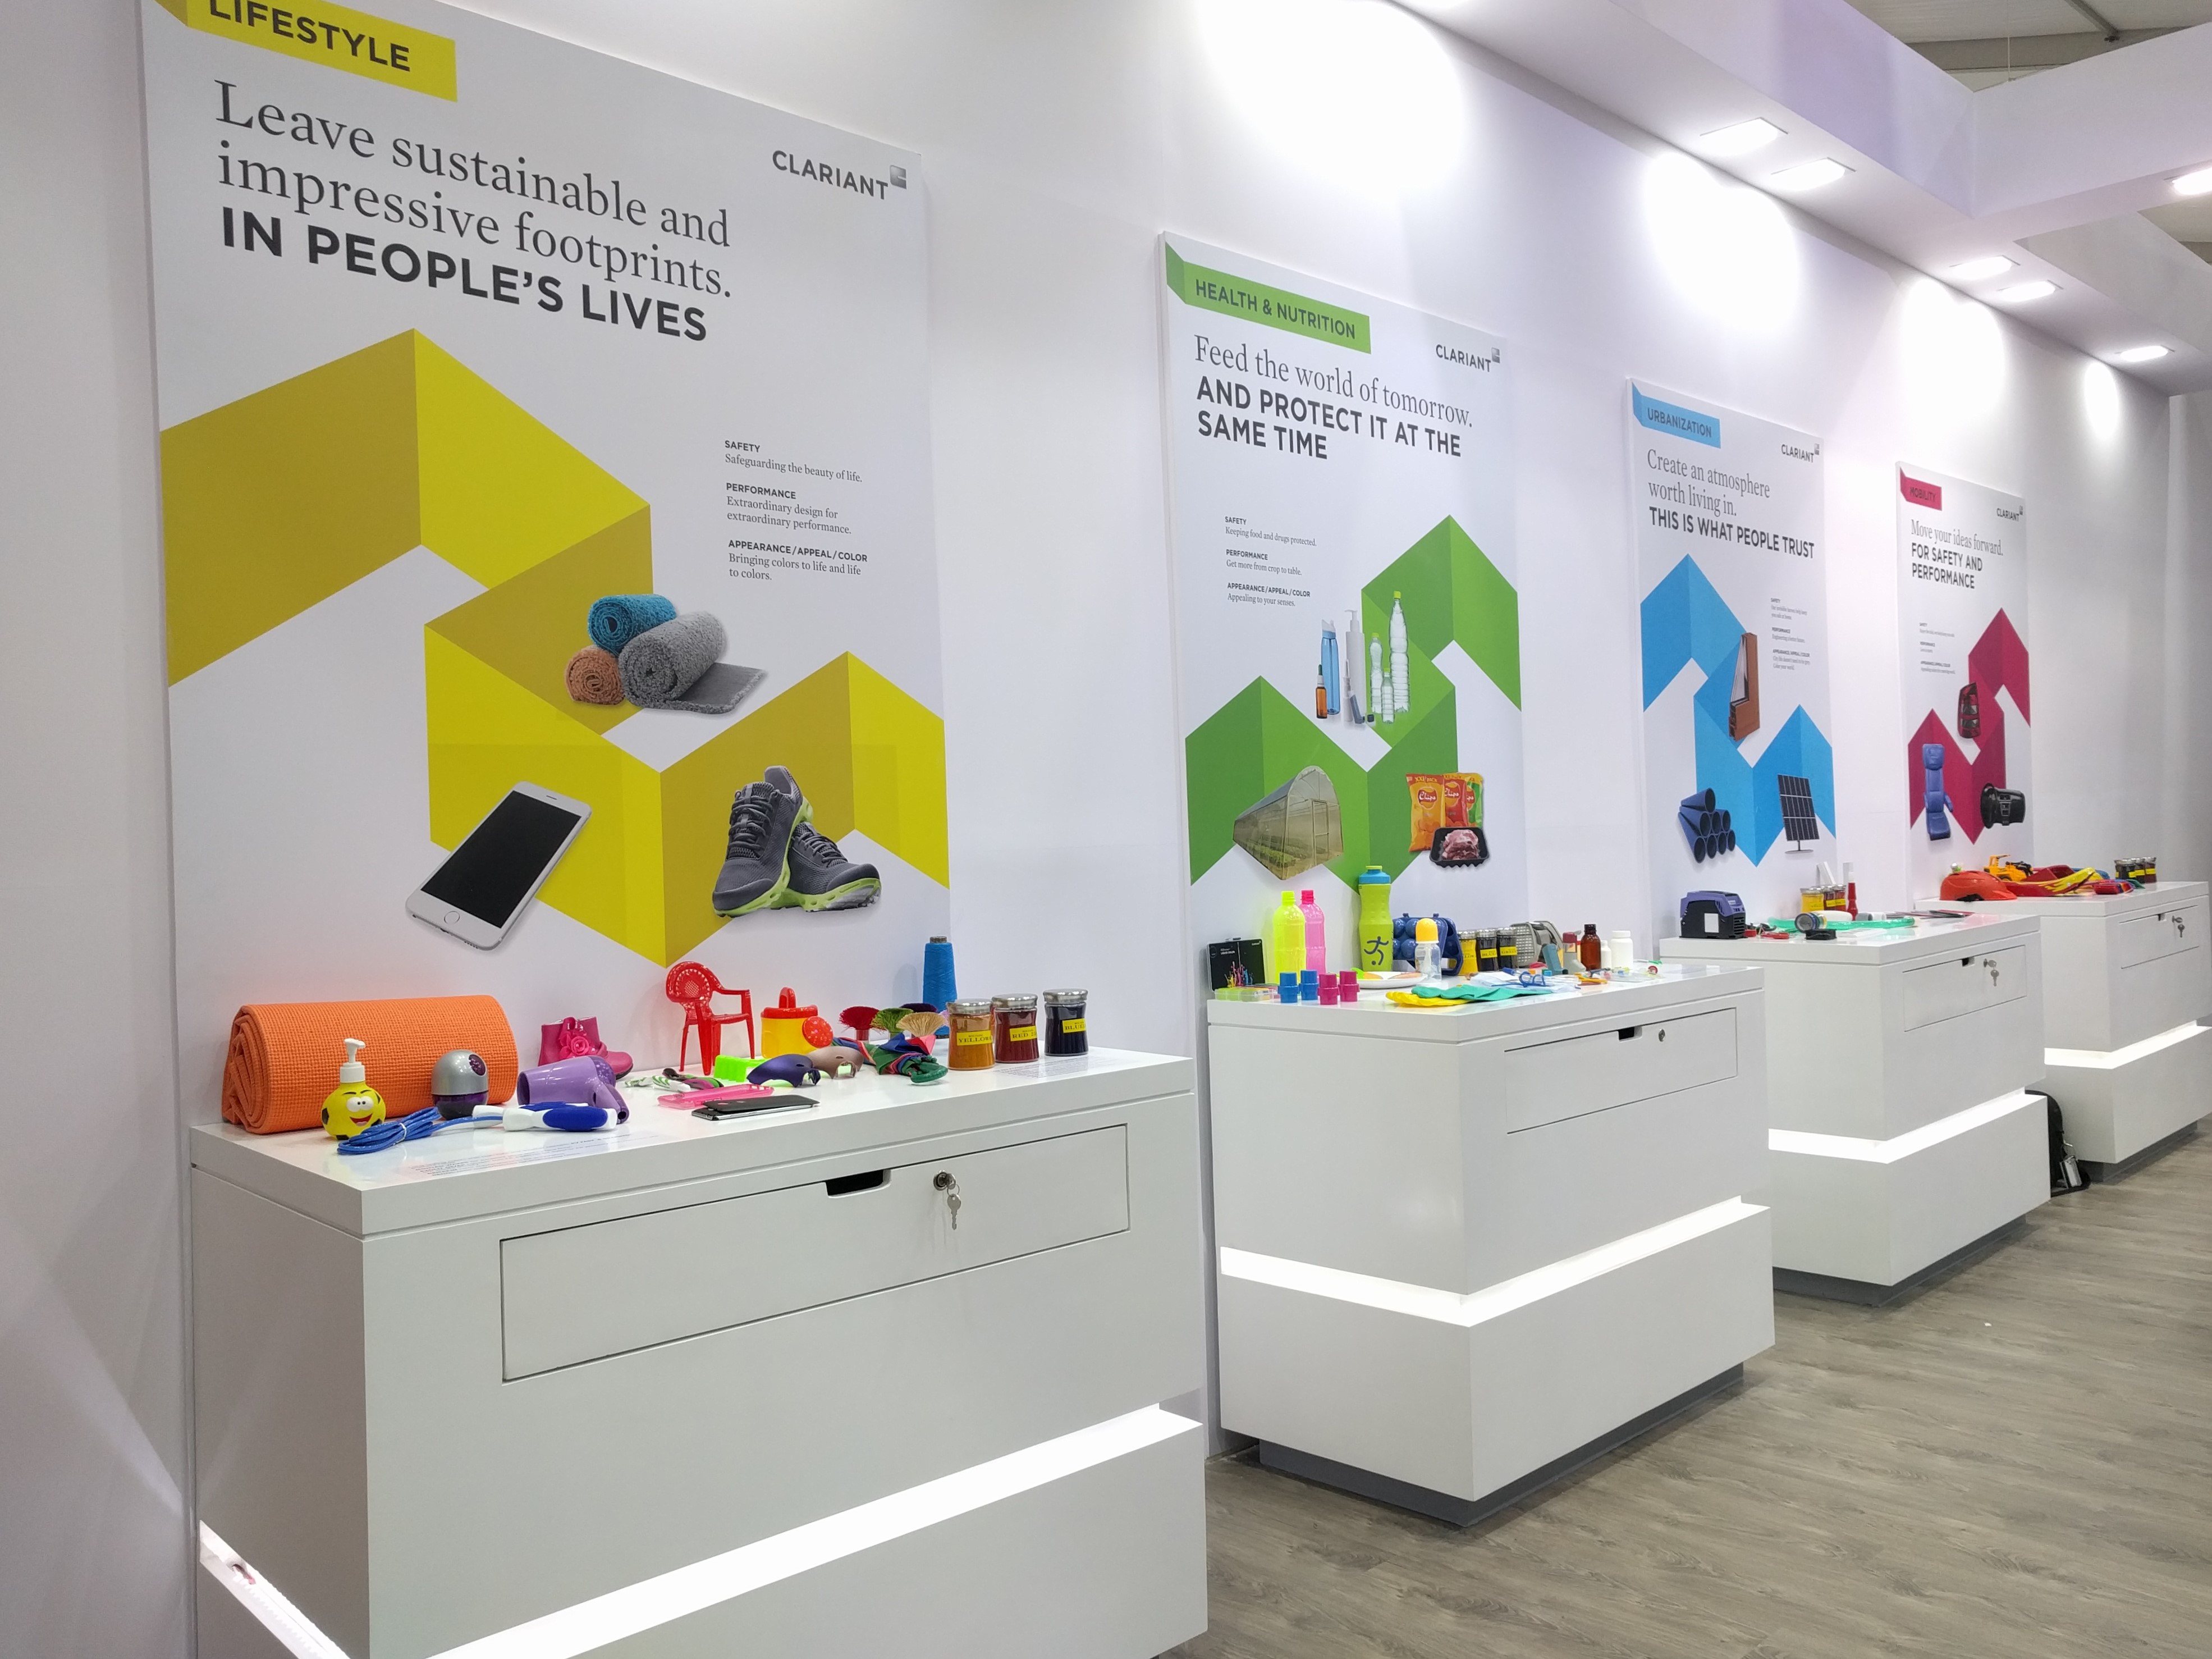 Clariant showcases products under the megatrends of lifestyle, health & nutrition, urbanization an...